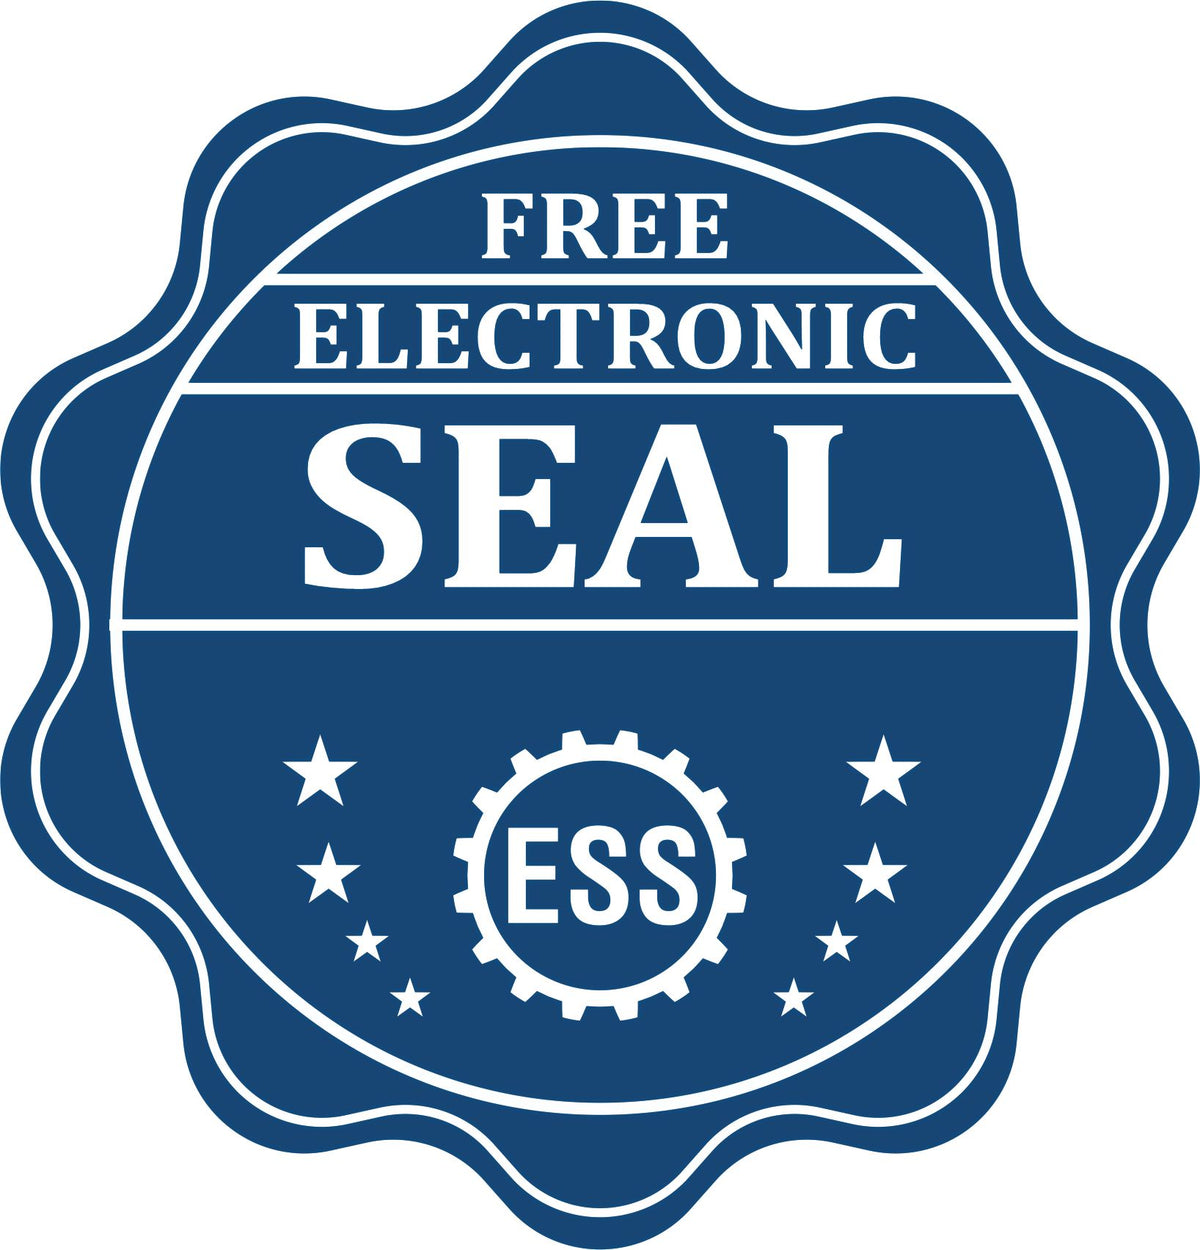 A badge showing a free electronic seal for the State of Georgia Extended Long Reach Engineer Seal with stars and the ESS gear on the emblem.